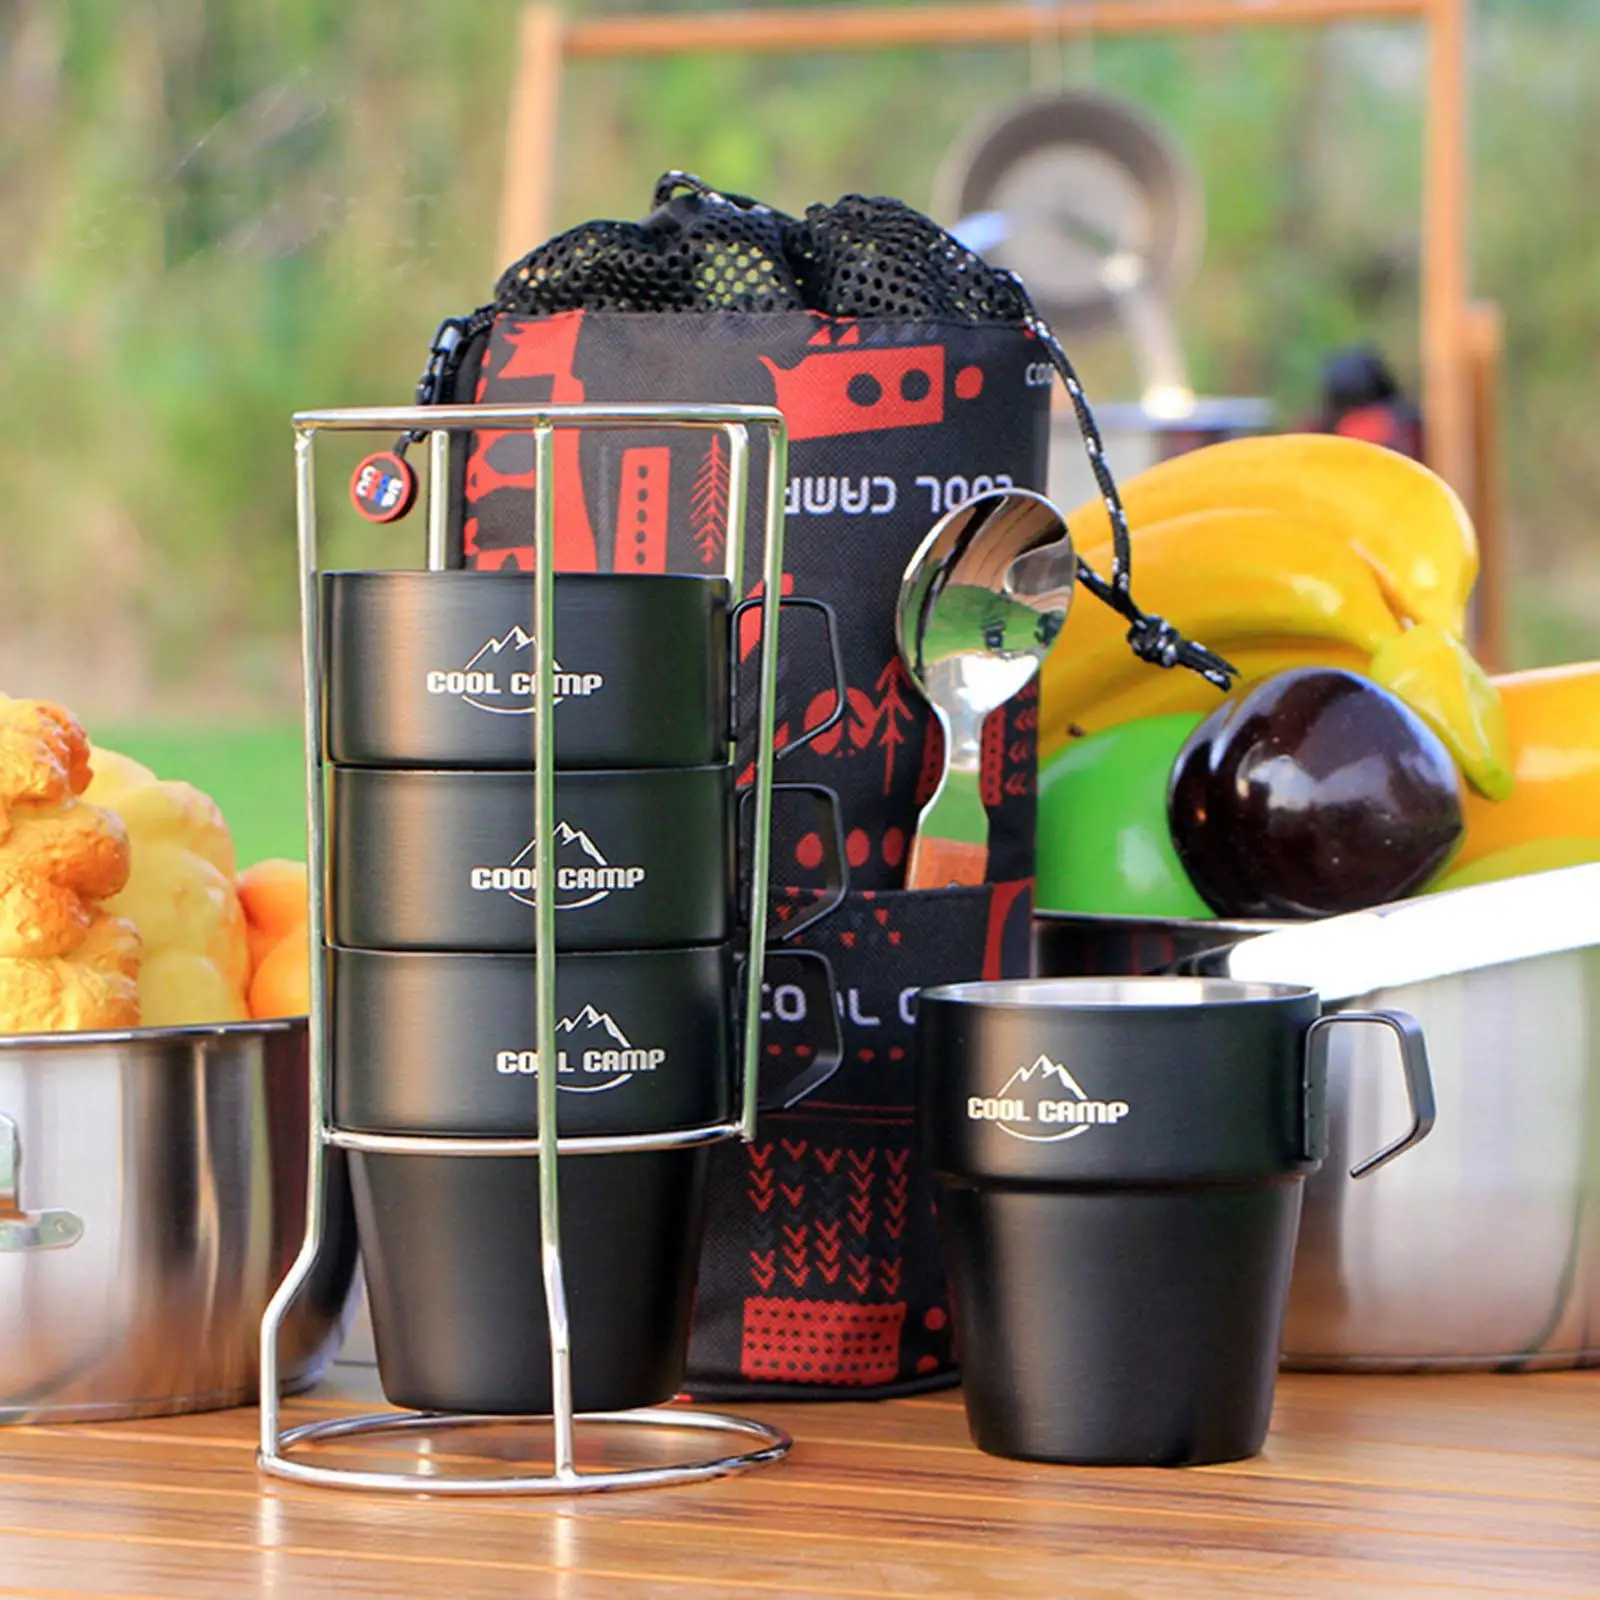 Double Camping Mugs Heating Portable with Reusable Light Preservative for Baking